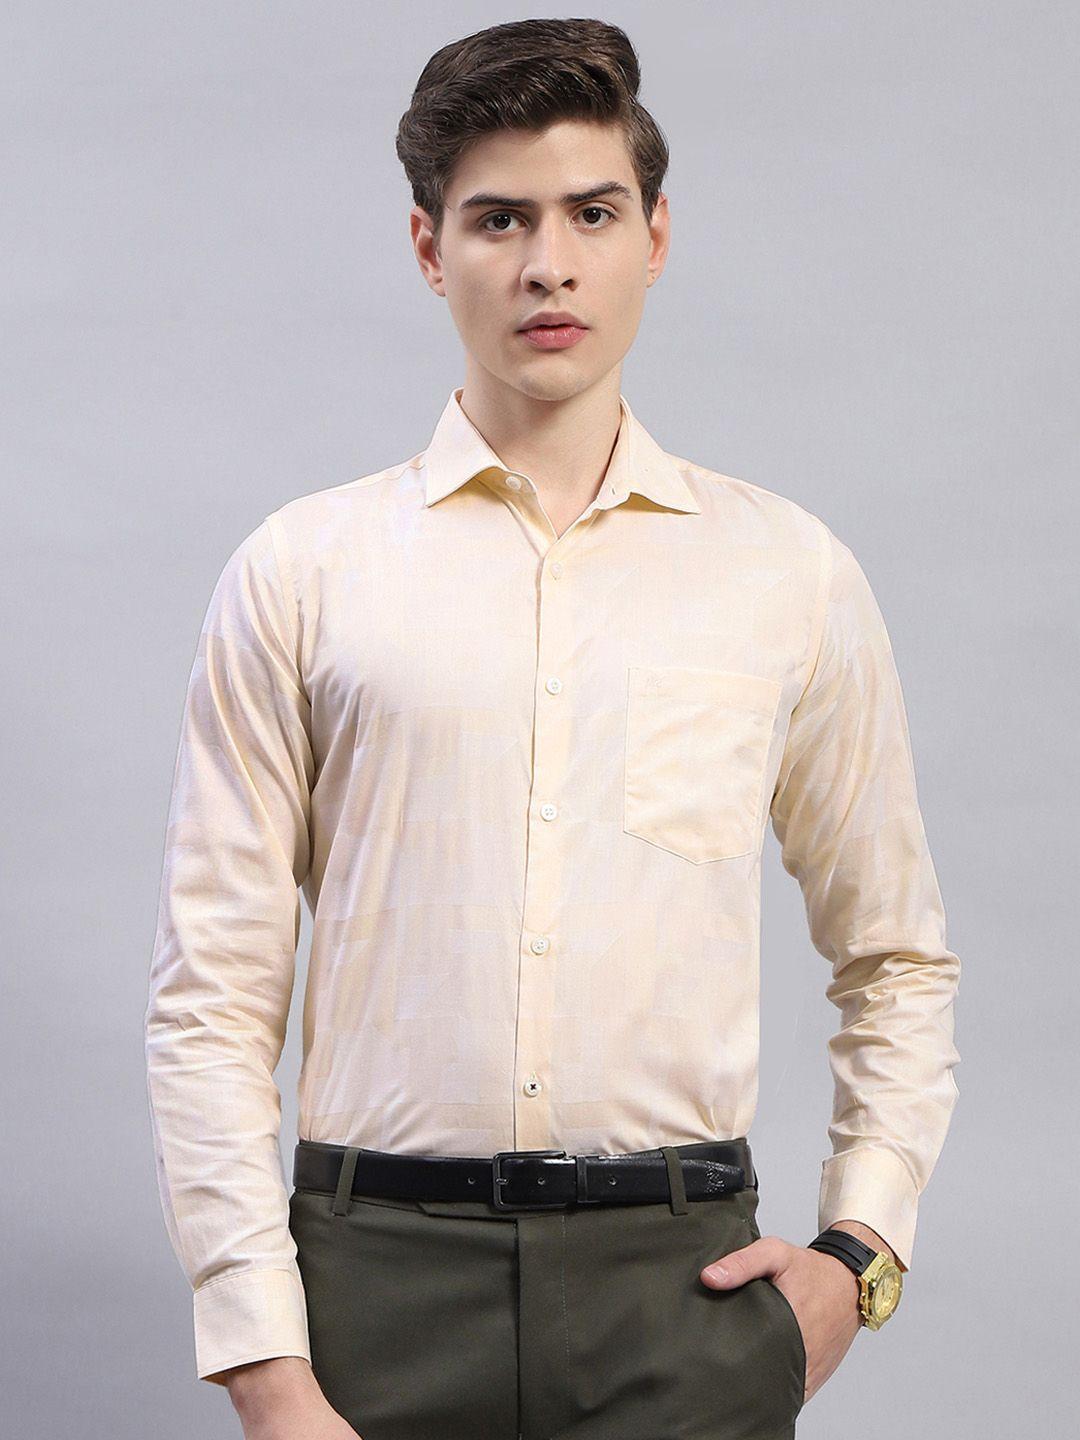 monte carlo classic textured pure cotton formal shirt